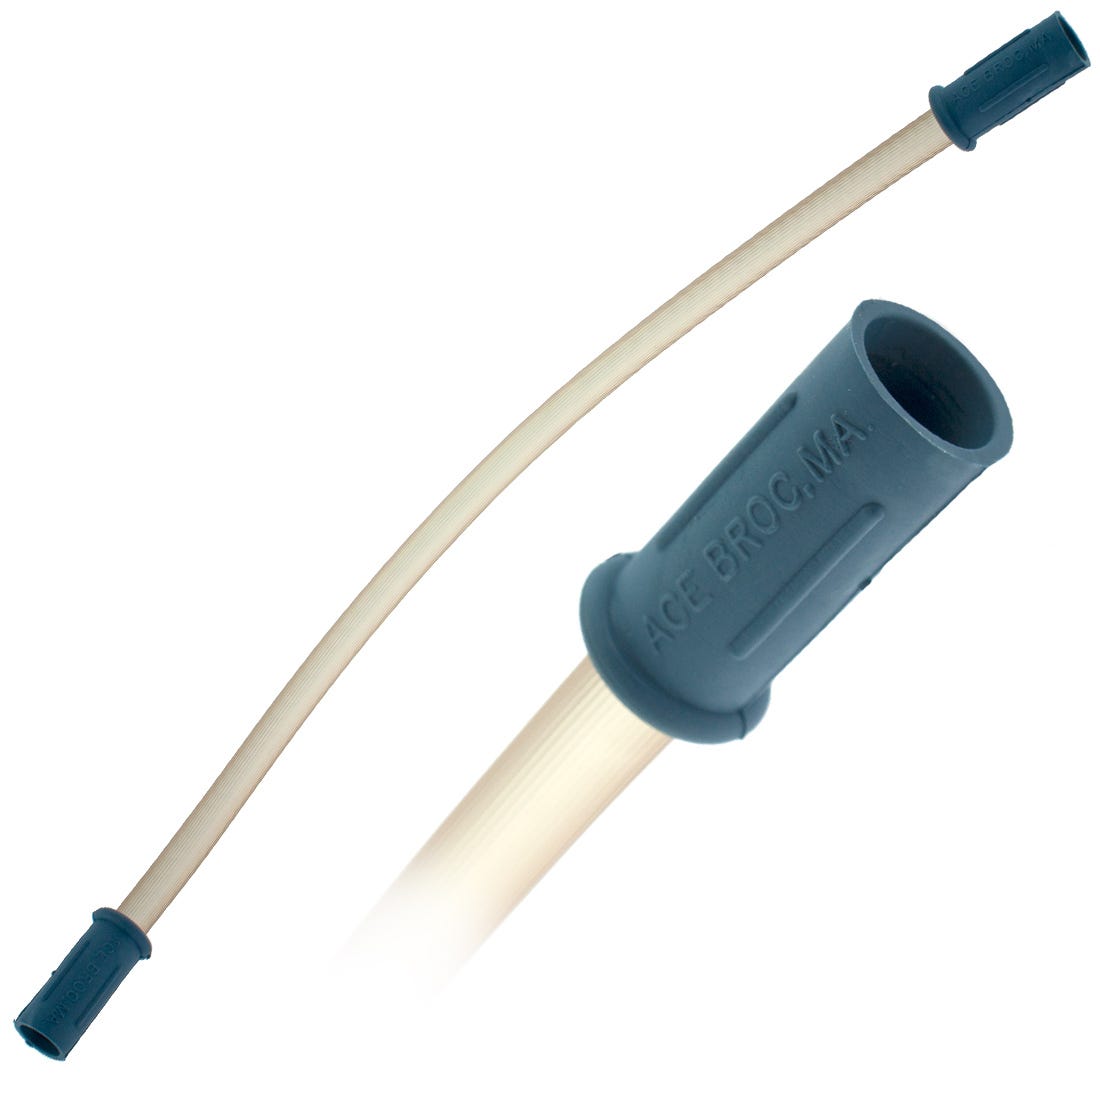 Suction Connection Tubing, Sterile, 1', 3cm